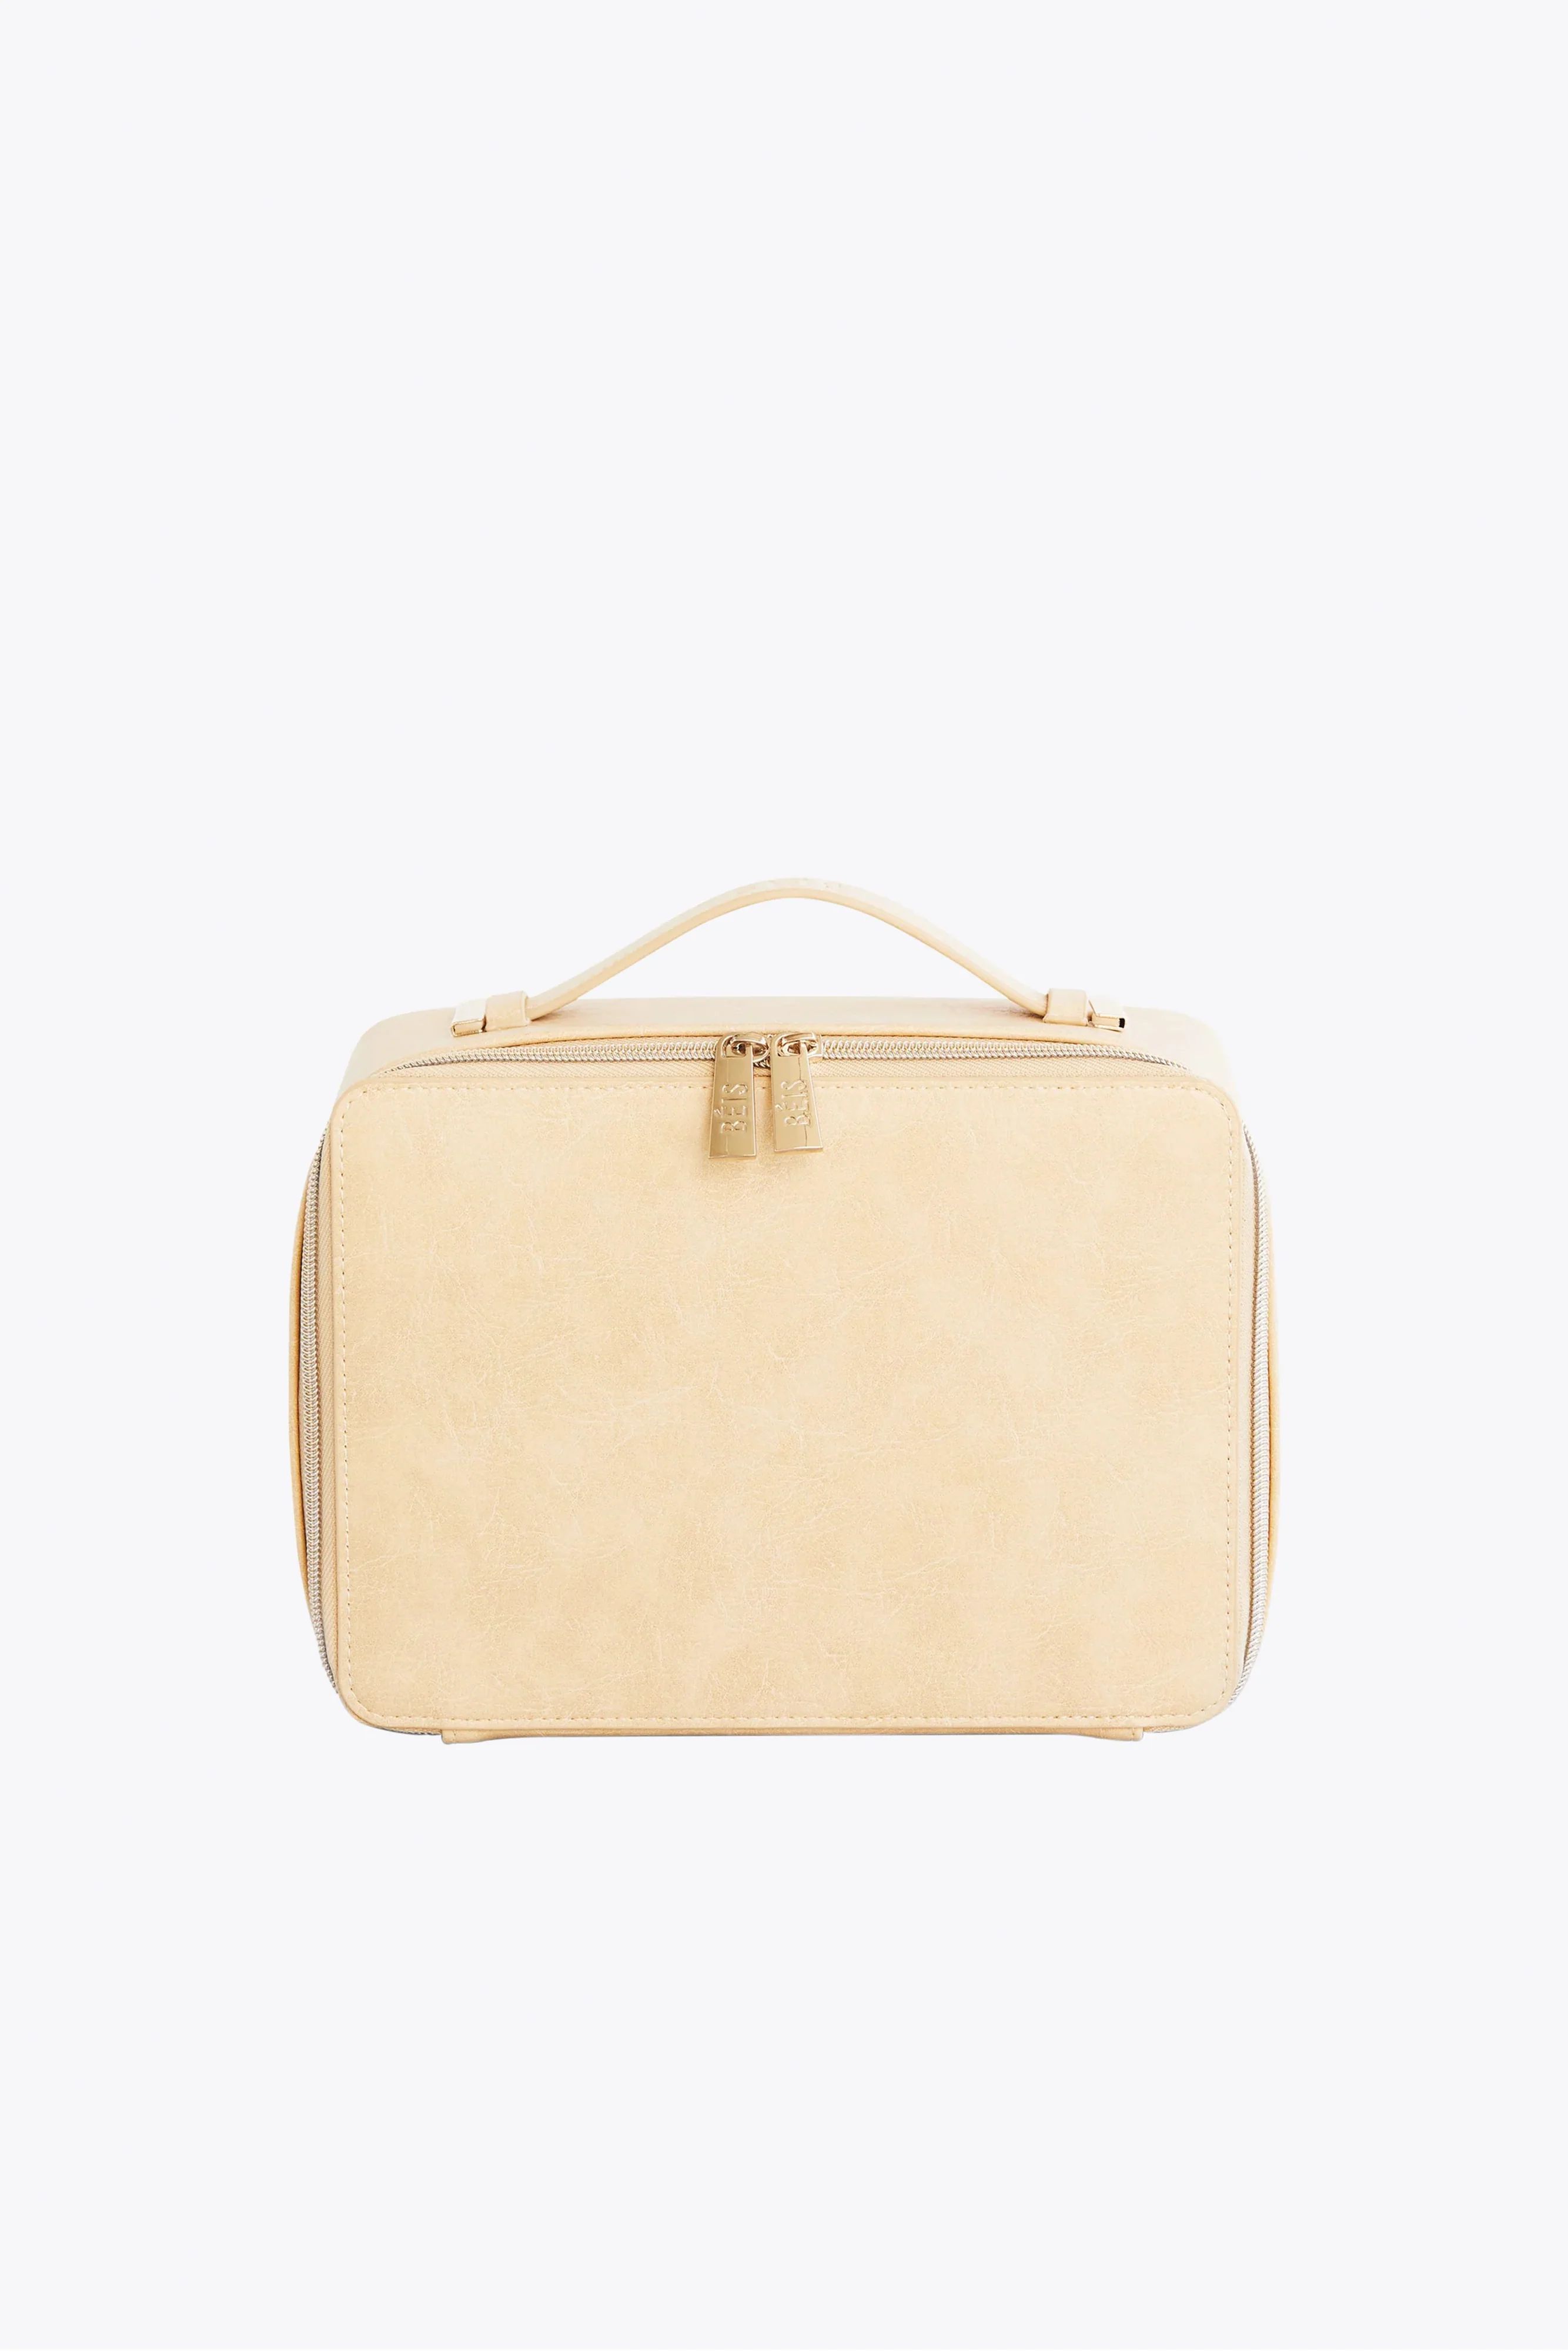 THE COSMETIC CASE IN BEIGE | BÉIS Travel